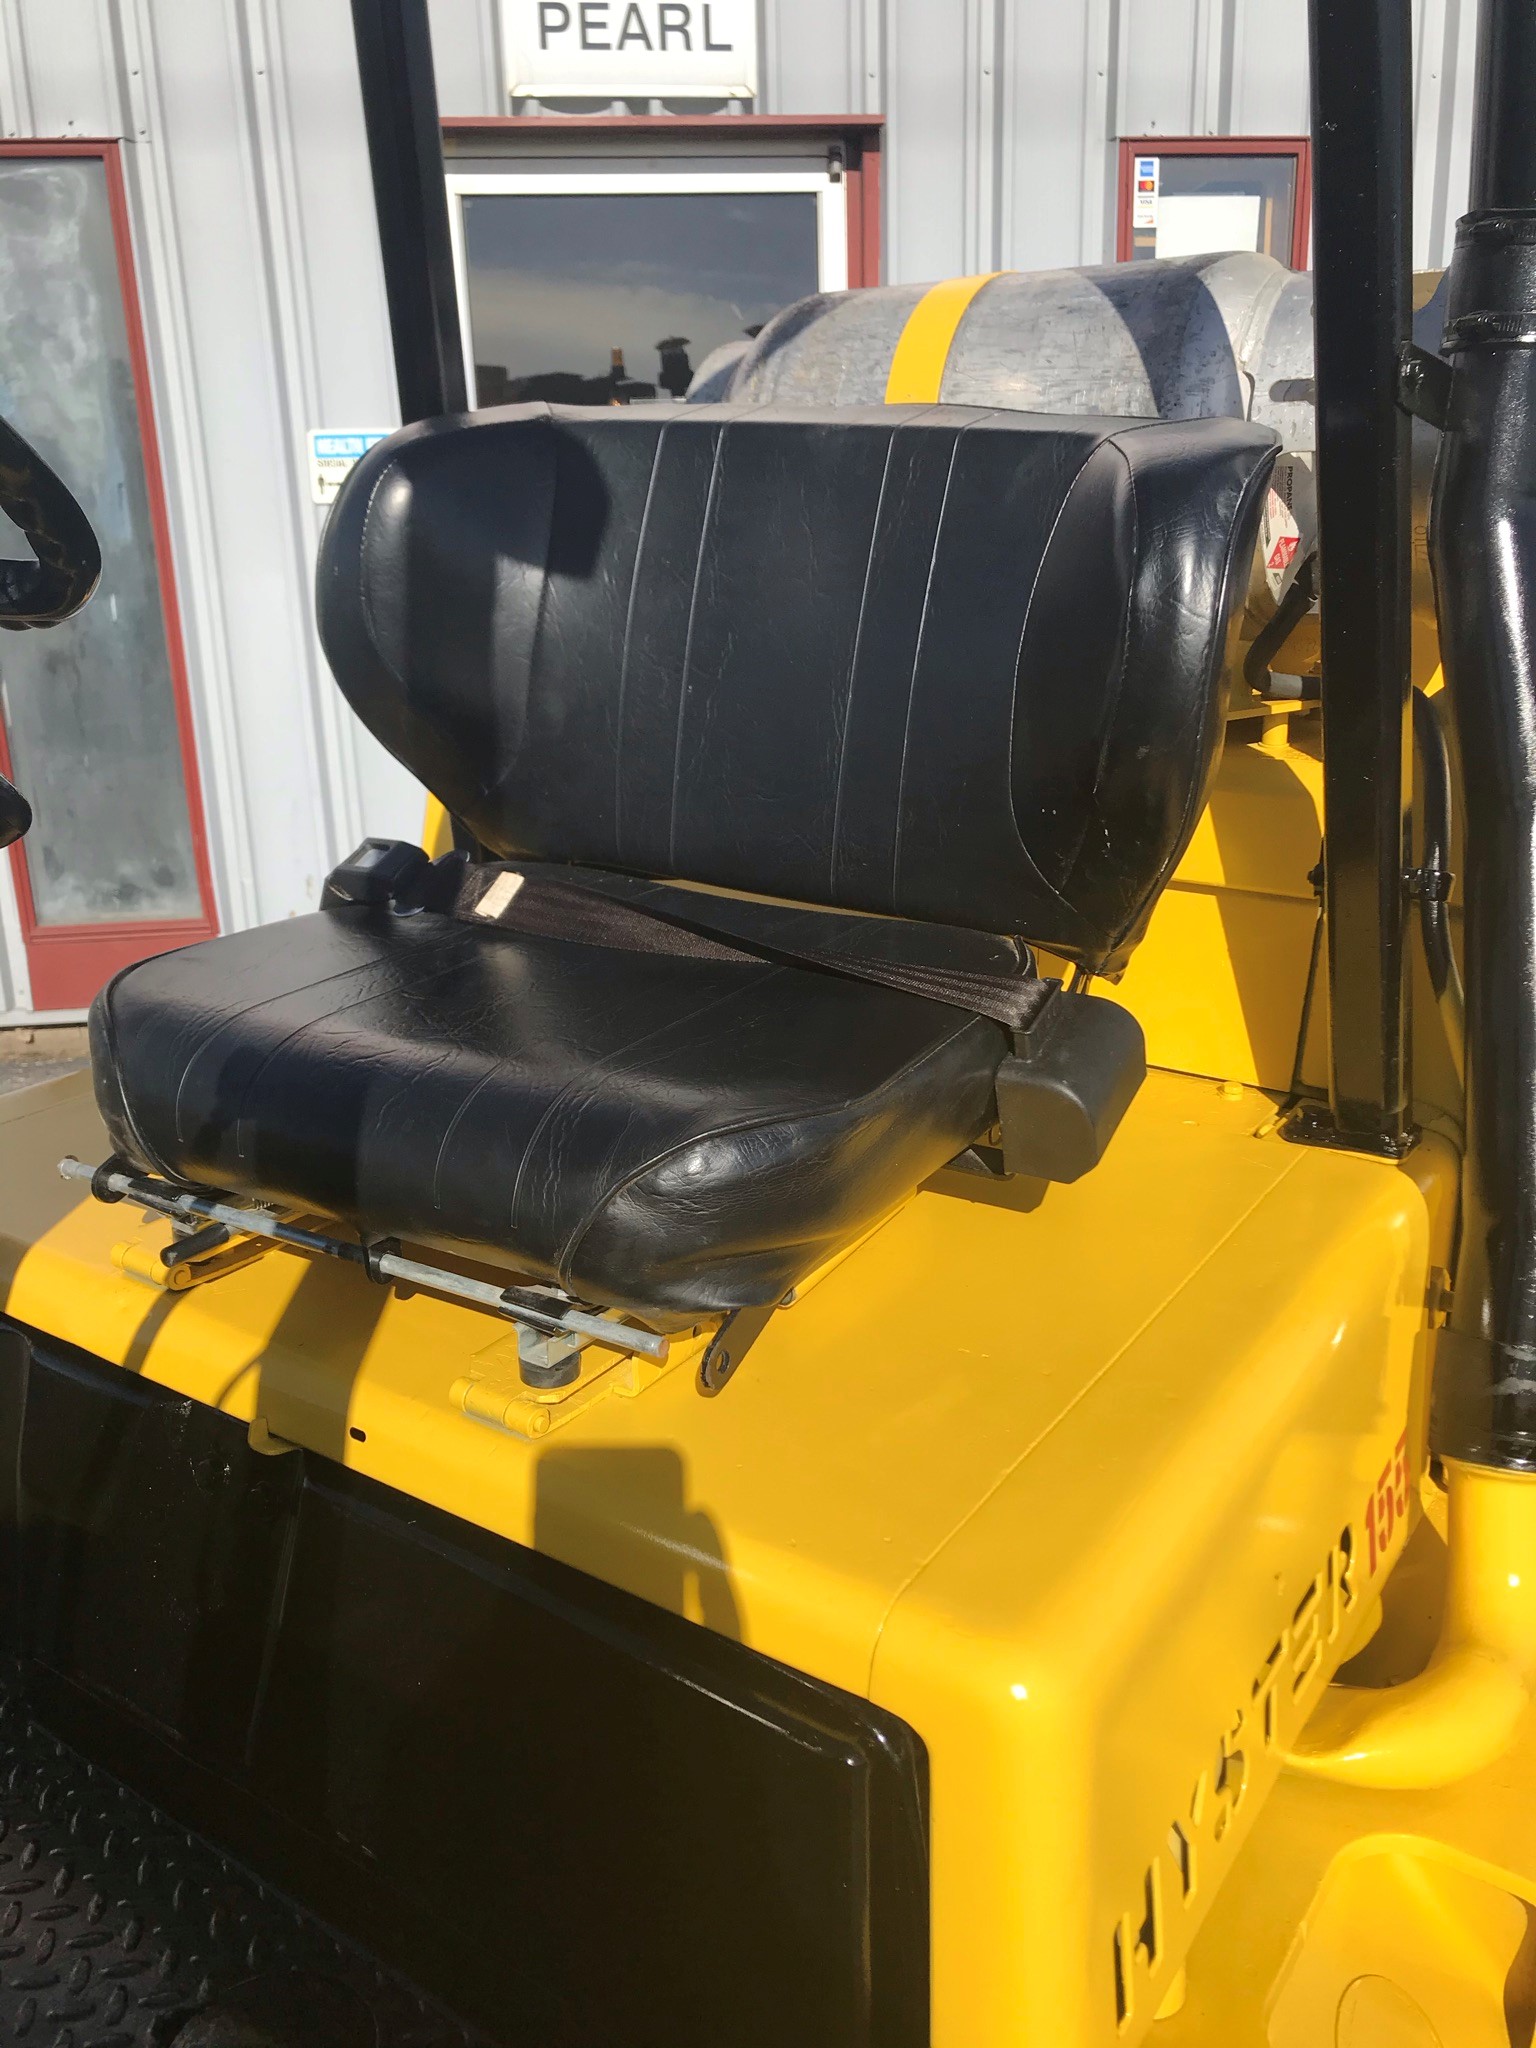 15,500lb capacity yellow hyster forklift for sale